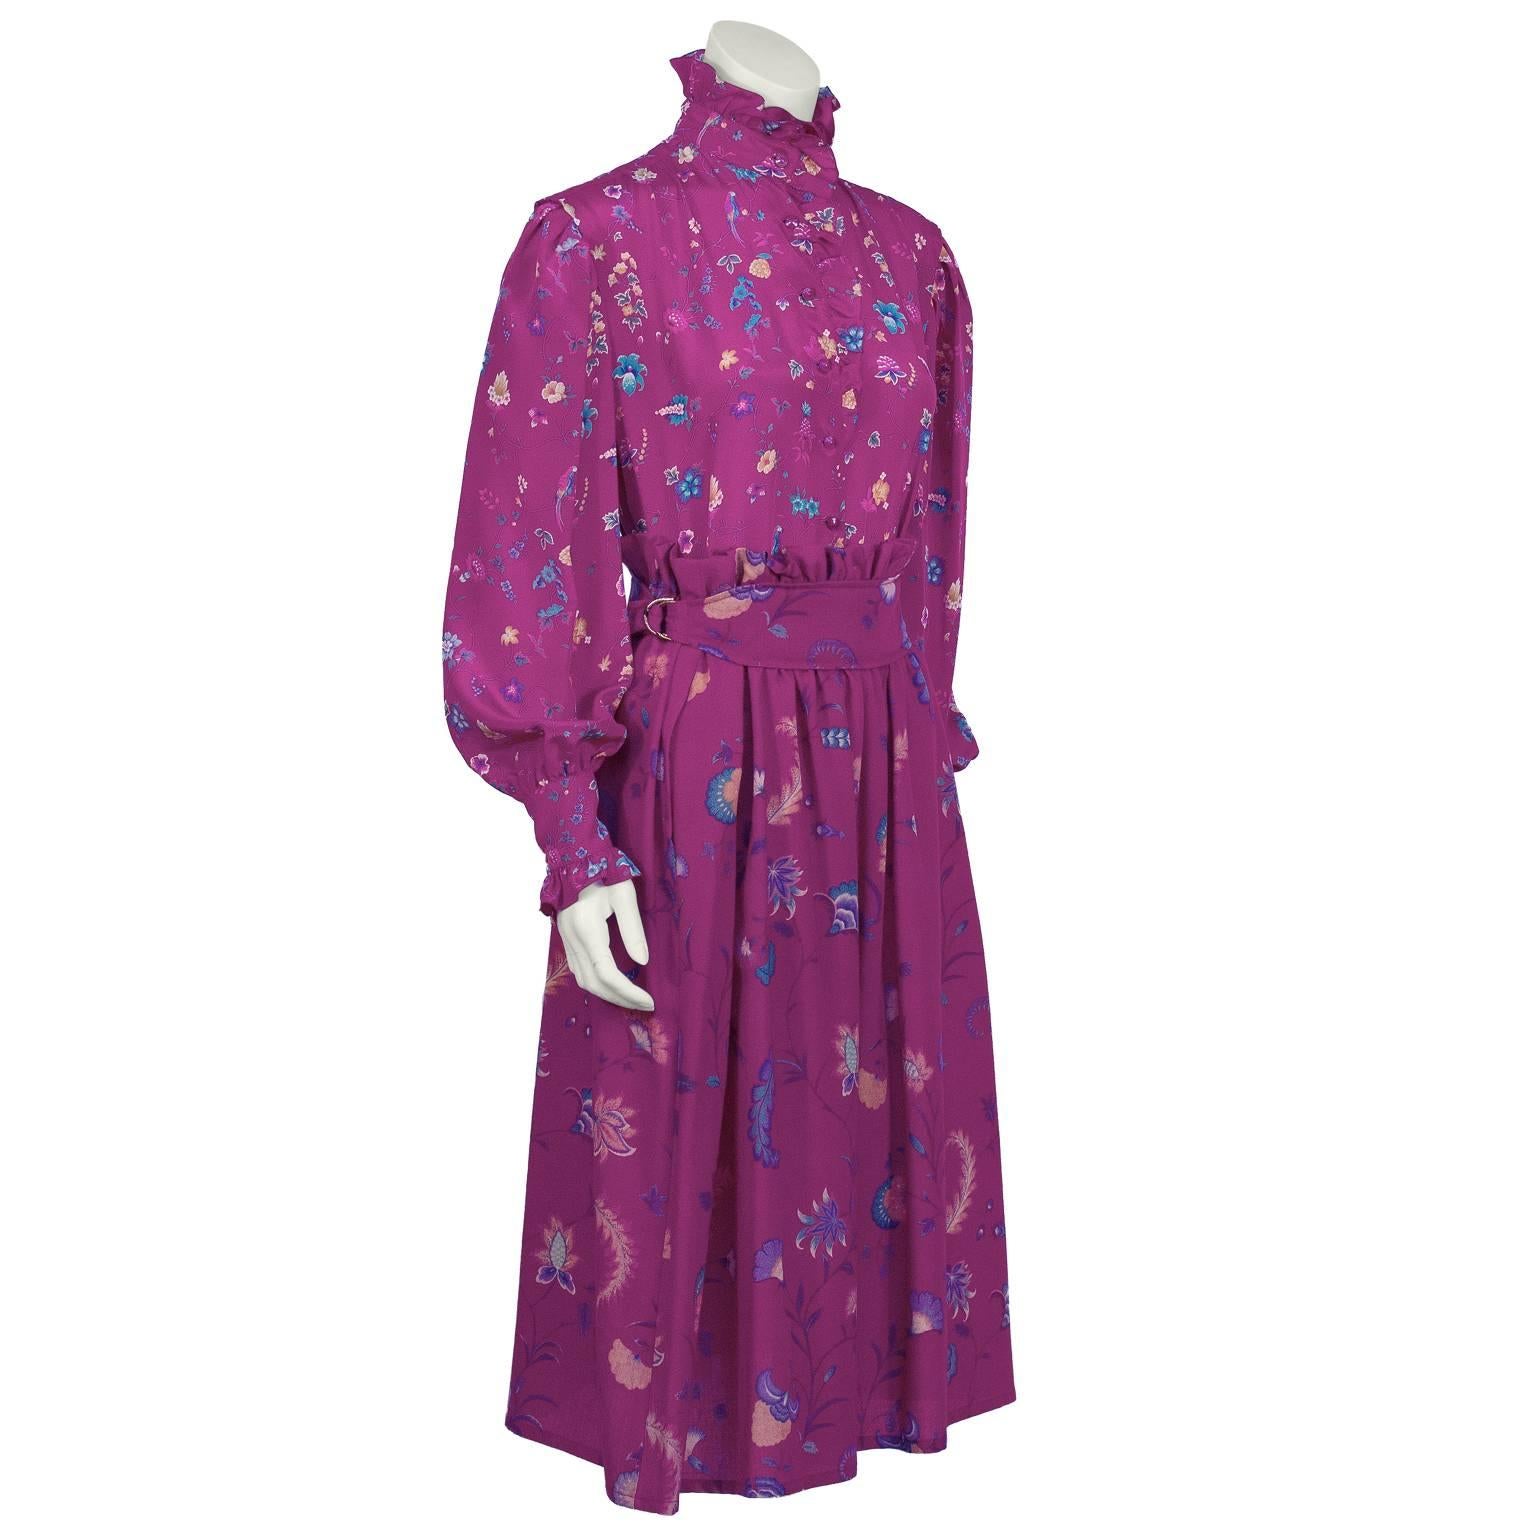 Brilliant Ungaro magenta floral outfit from the early 1980’s. The wool challis skirt and silk shirt feature the same overall pattern of teal, gold and pink flowers with parrots. The skirt is gathered dirndl style with inseam pockets and falls to the